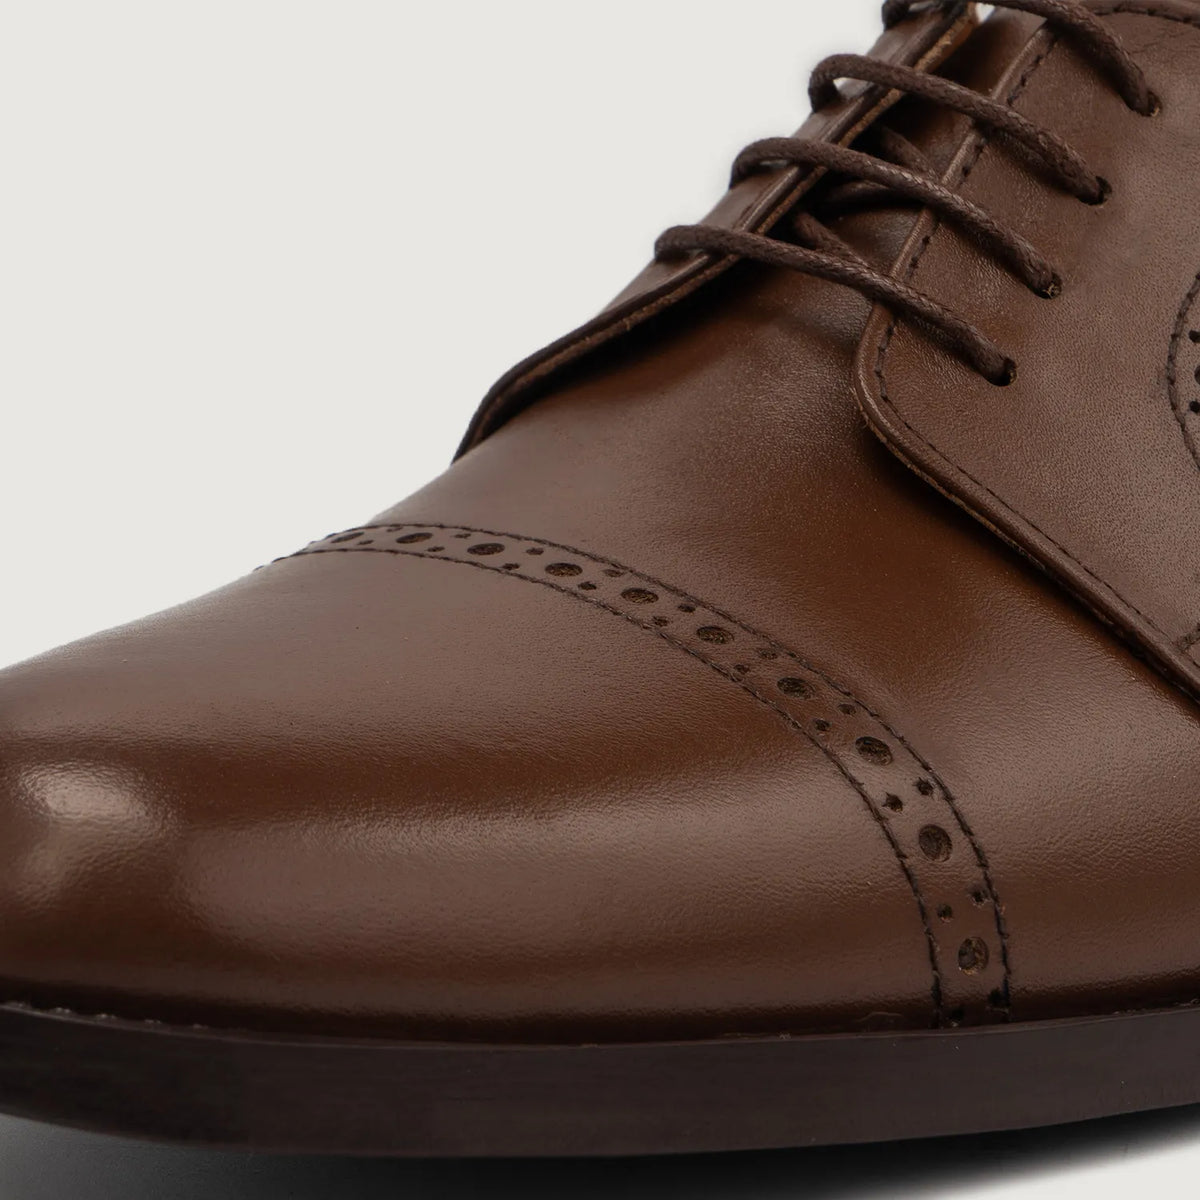 Dirk Brogues Derby Brown Leather Shoes